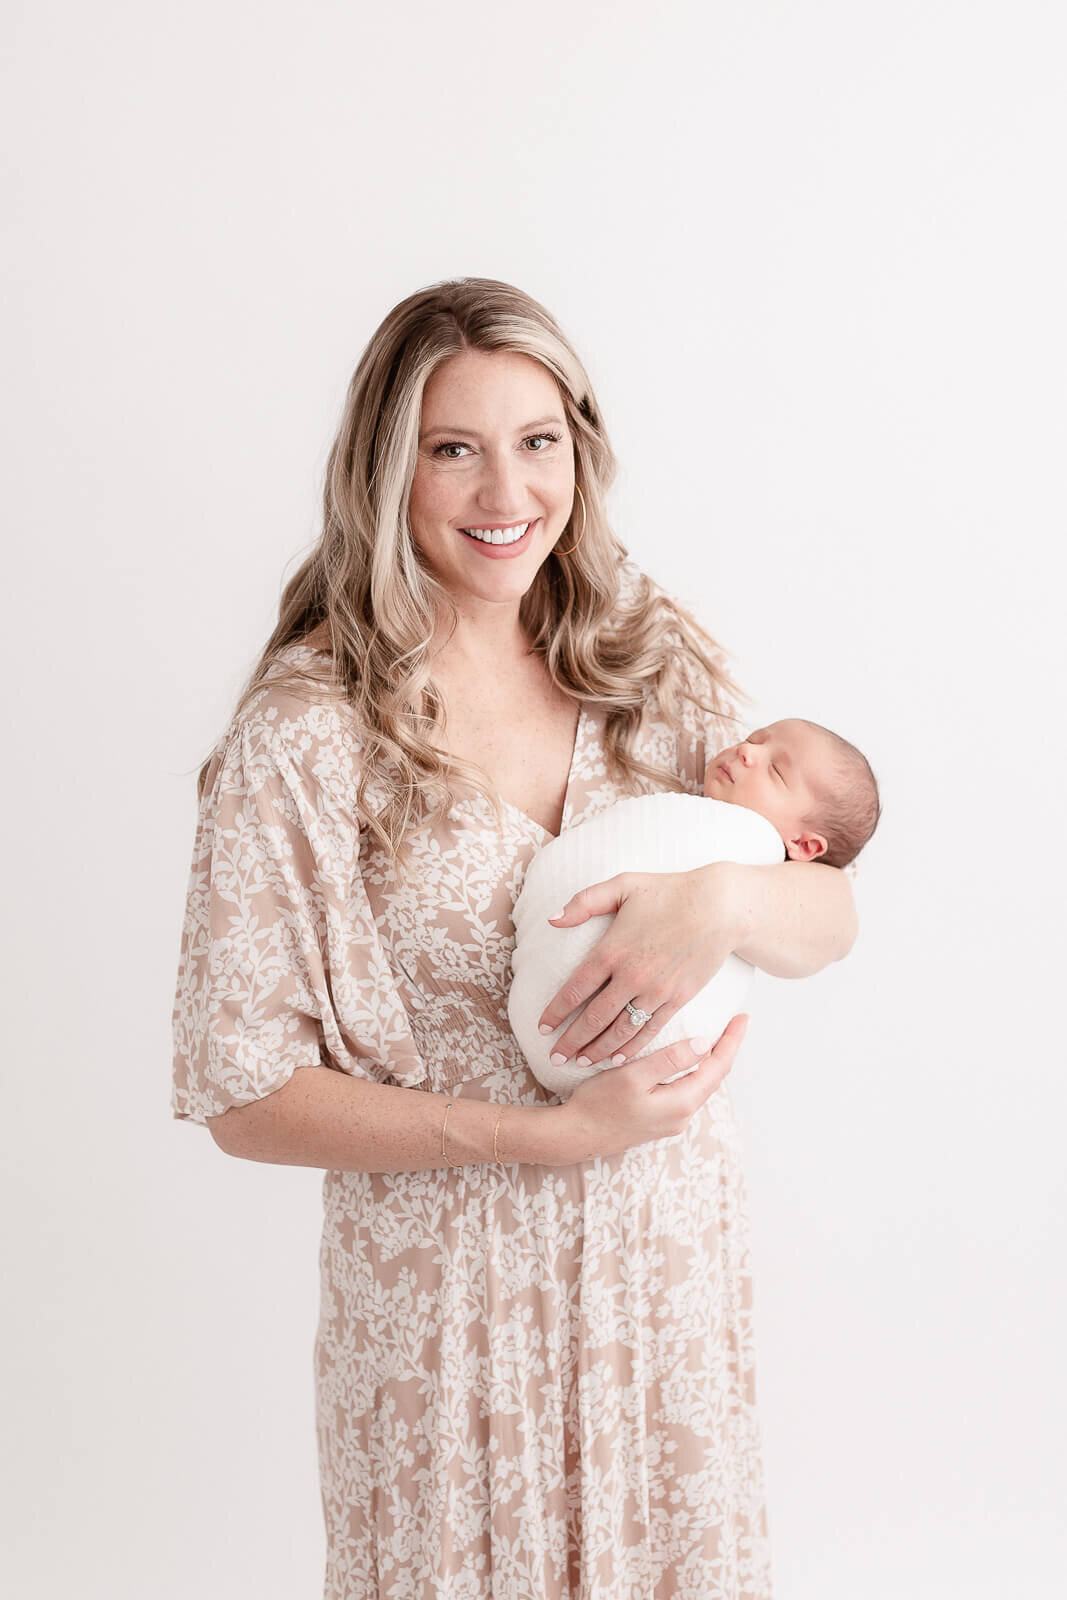 Gorgeous Mom with professional hair and makeup done and wearing a beige and white floral dress. She is holding her newborn baby who is wrapped in a white swaddle and sleeping peacefully. Mom is looking at the camera with a beautiful smile on her face.